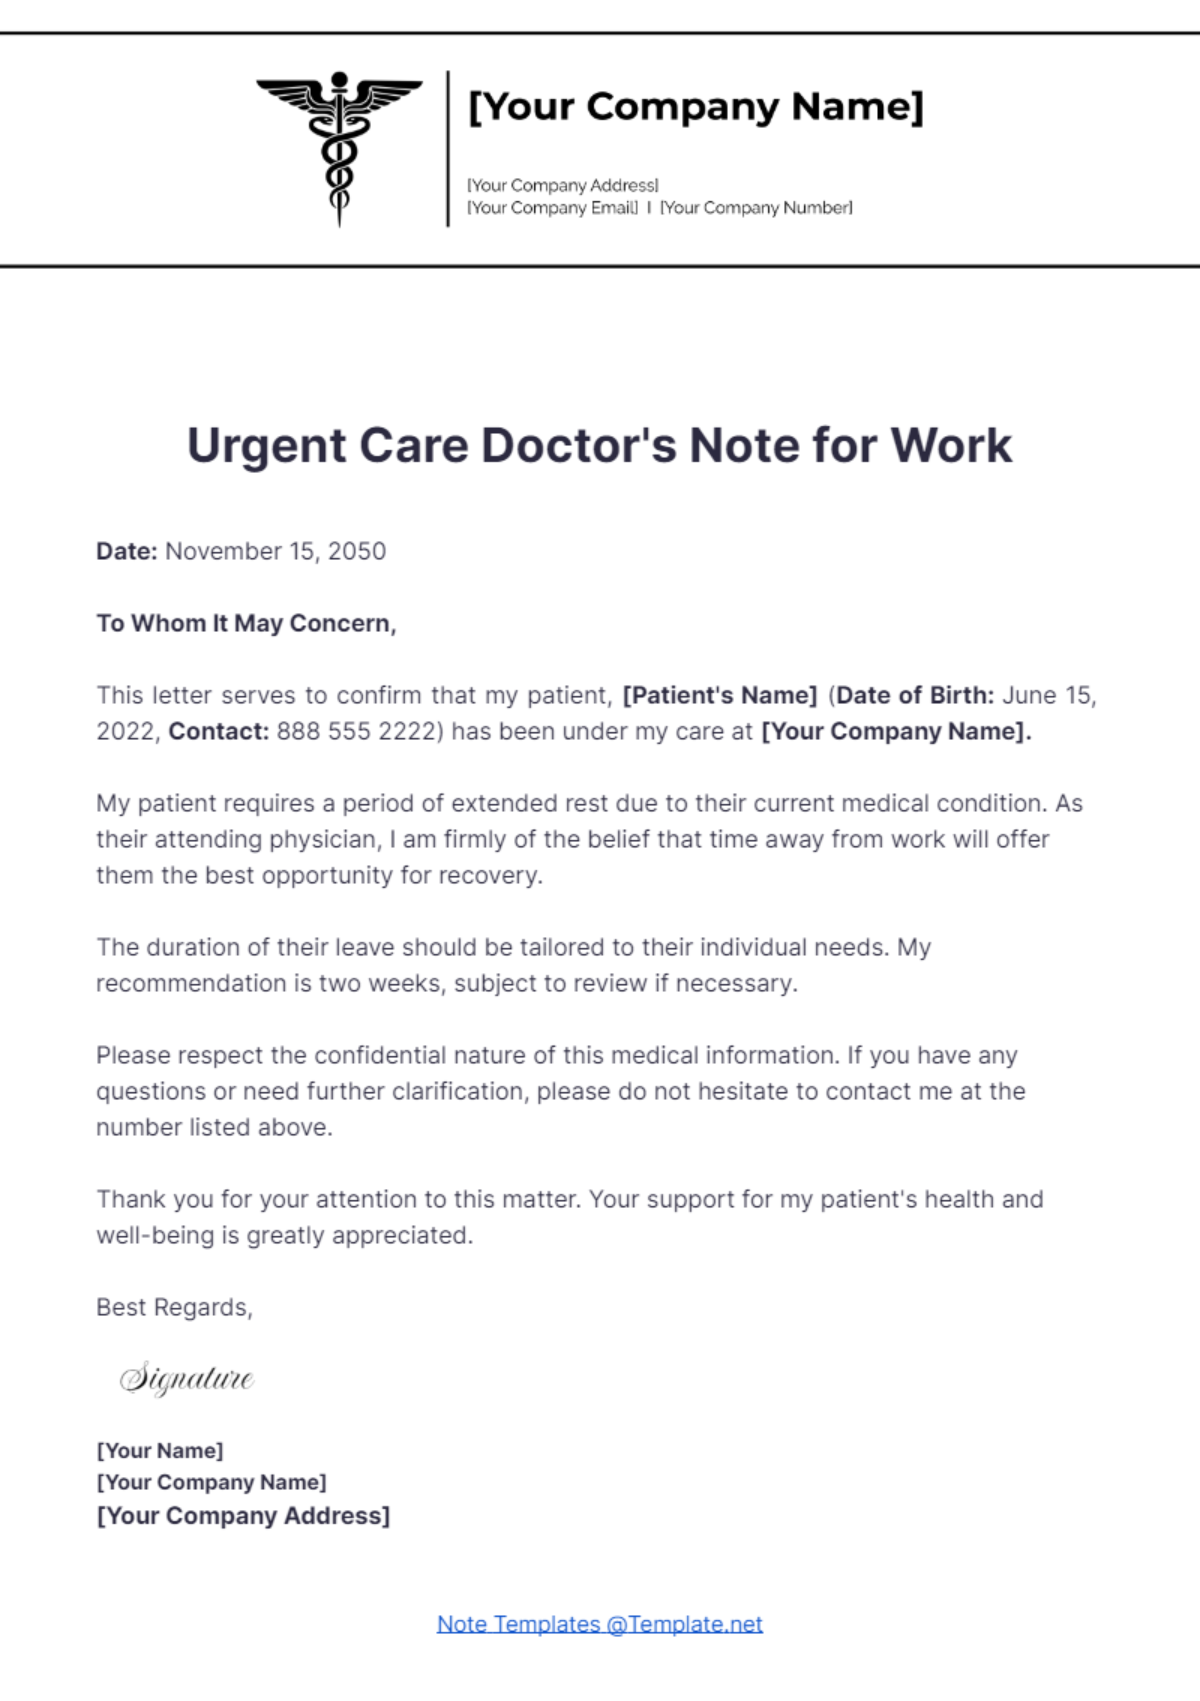 Free Urgent Care Doctor's Note For Work Template